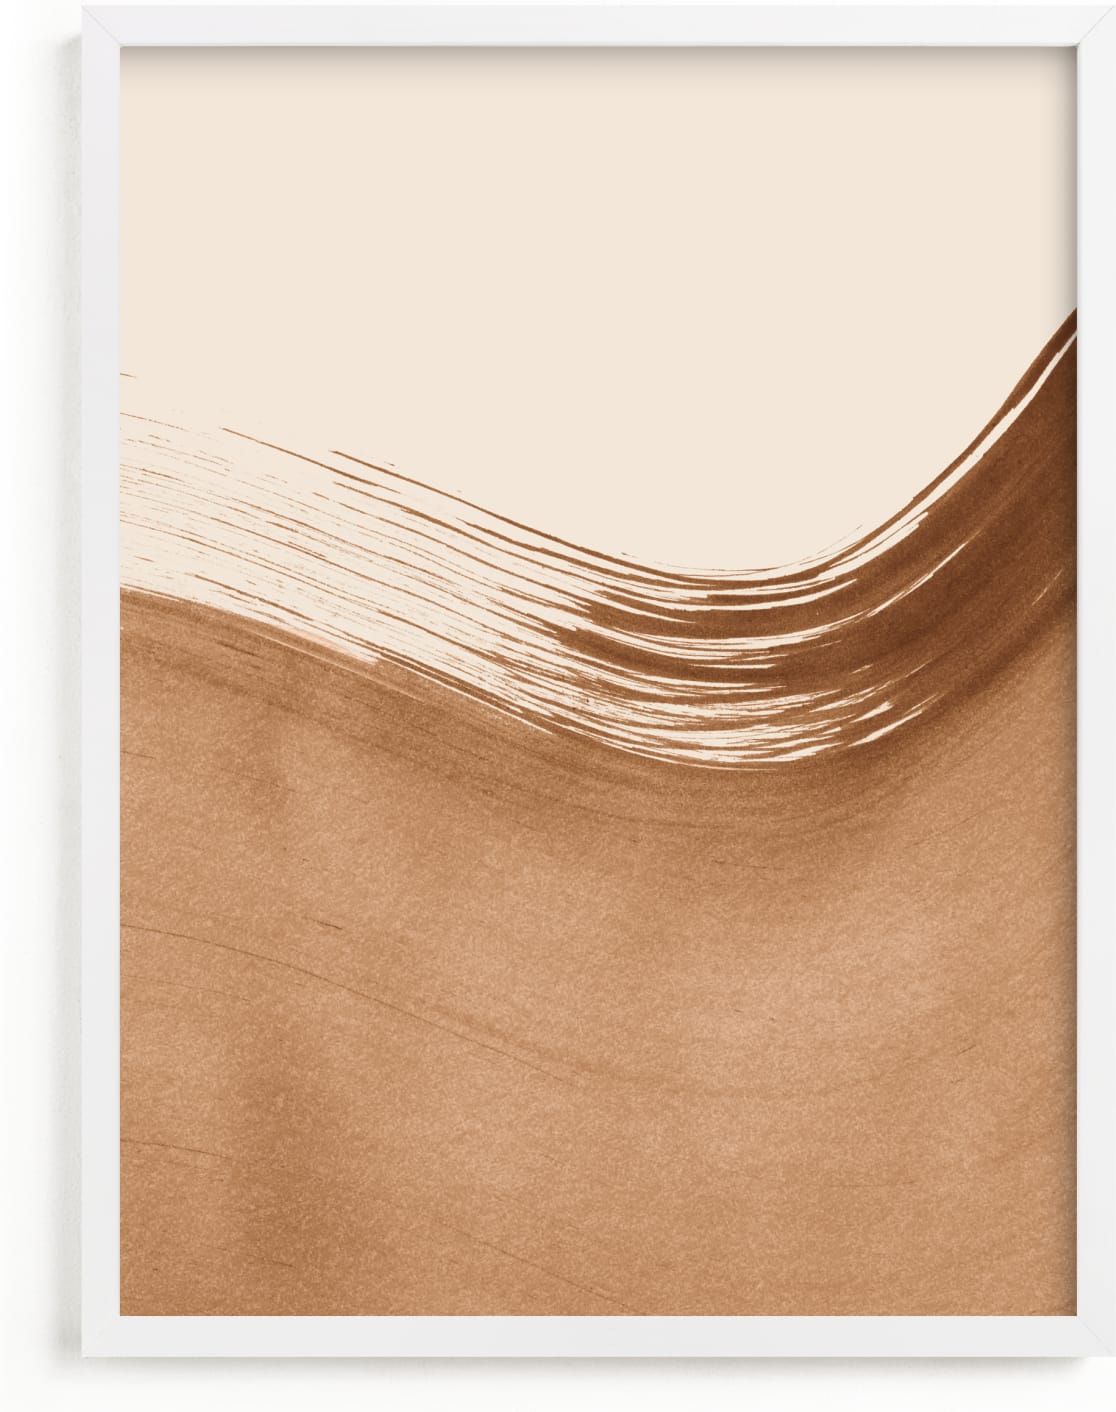 This is a brown art by Melissa Selmin called Boundary No. 2.